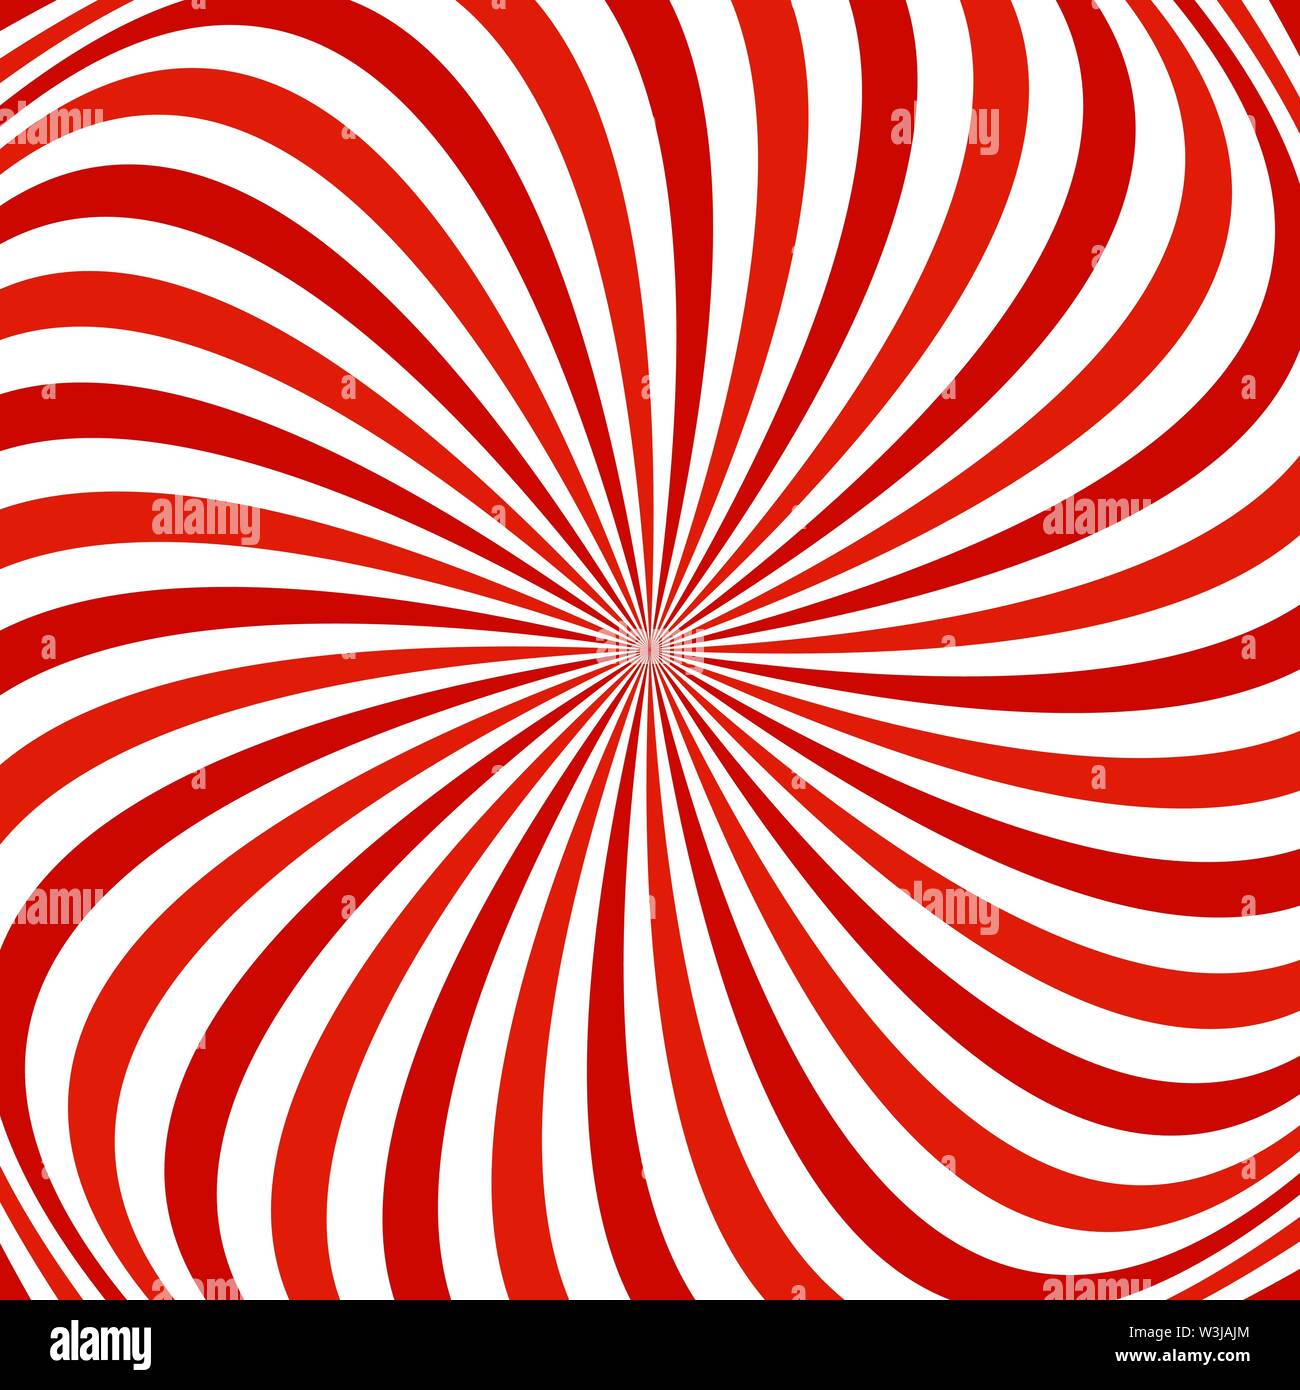 Red and white spiral abstract background - vector graphic design Stock Vector